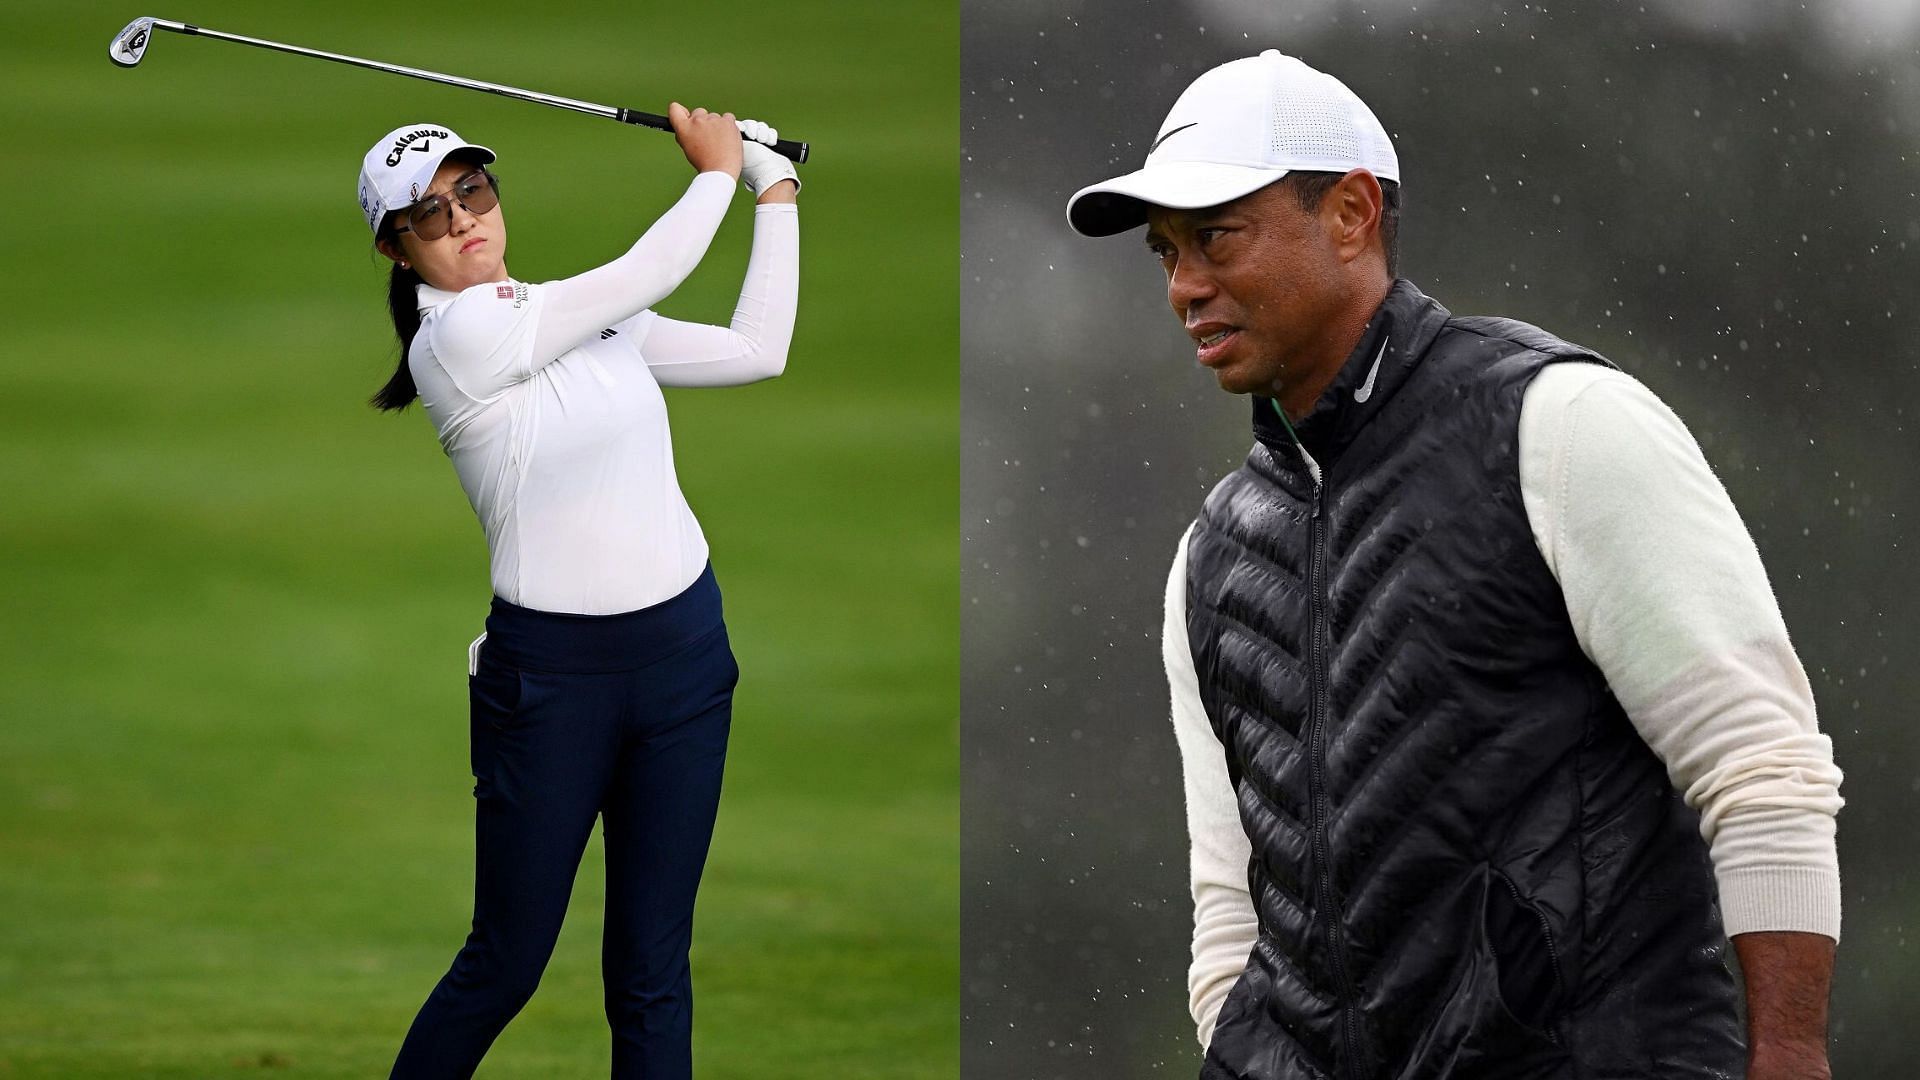 Rose Zhang is getting help from Tiger Woods